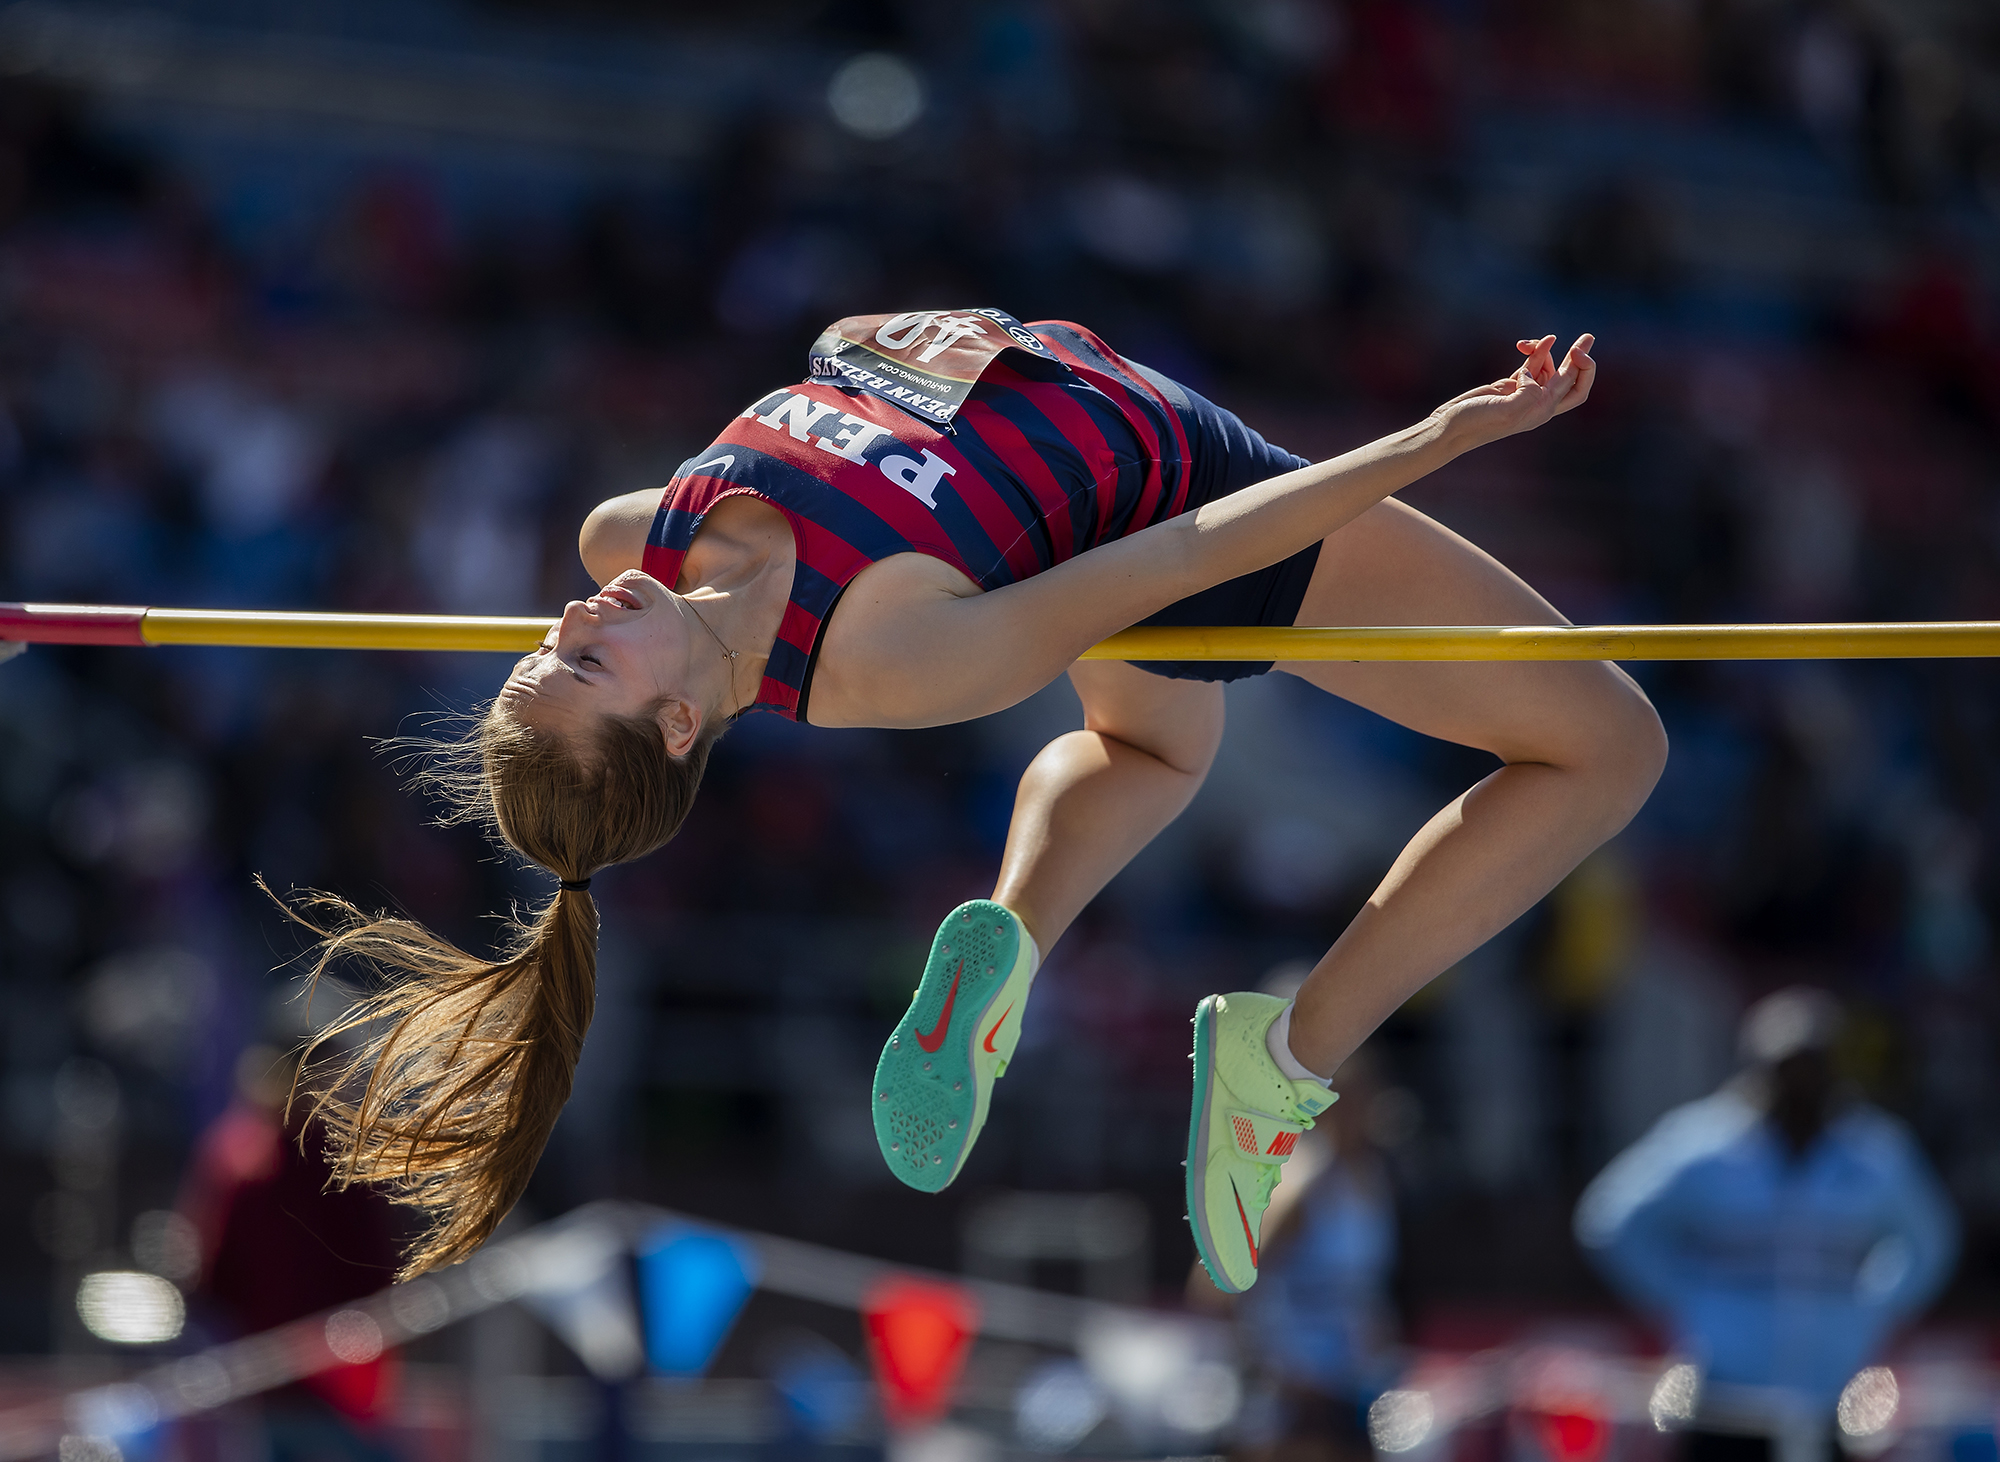 A person arching over a high jump bar in mid-air.